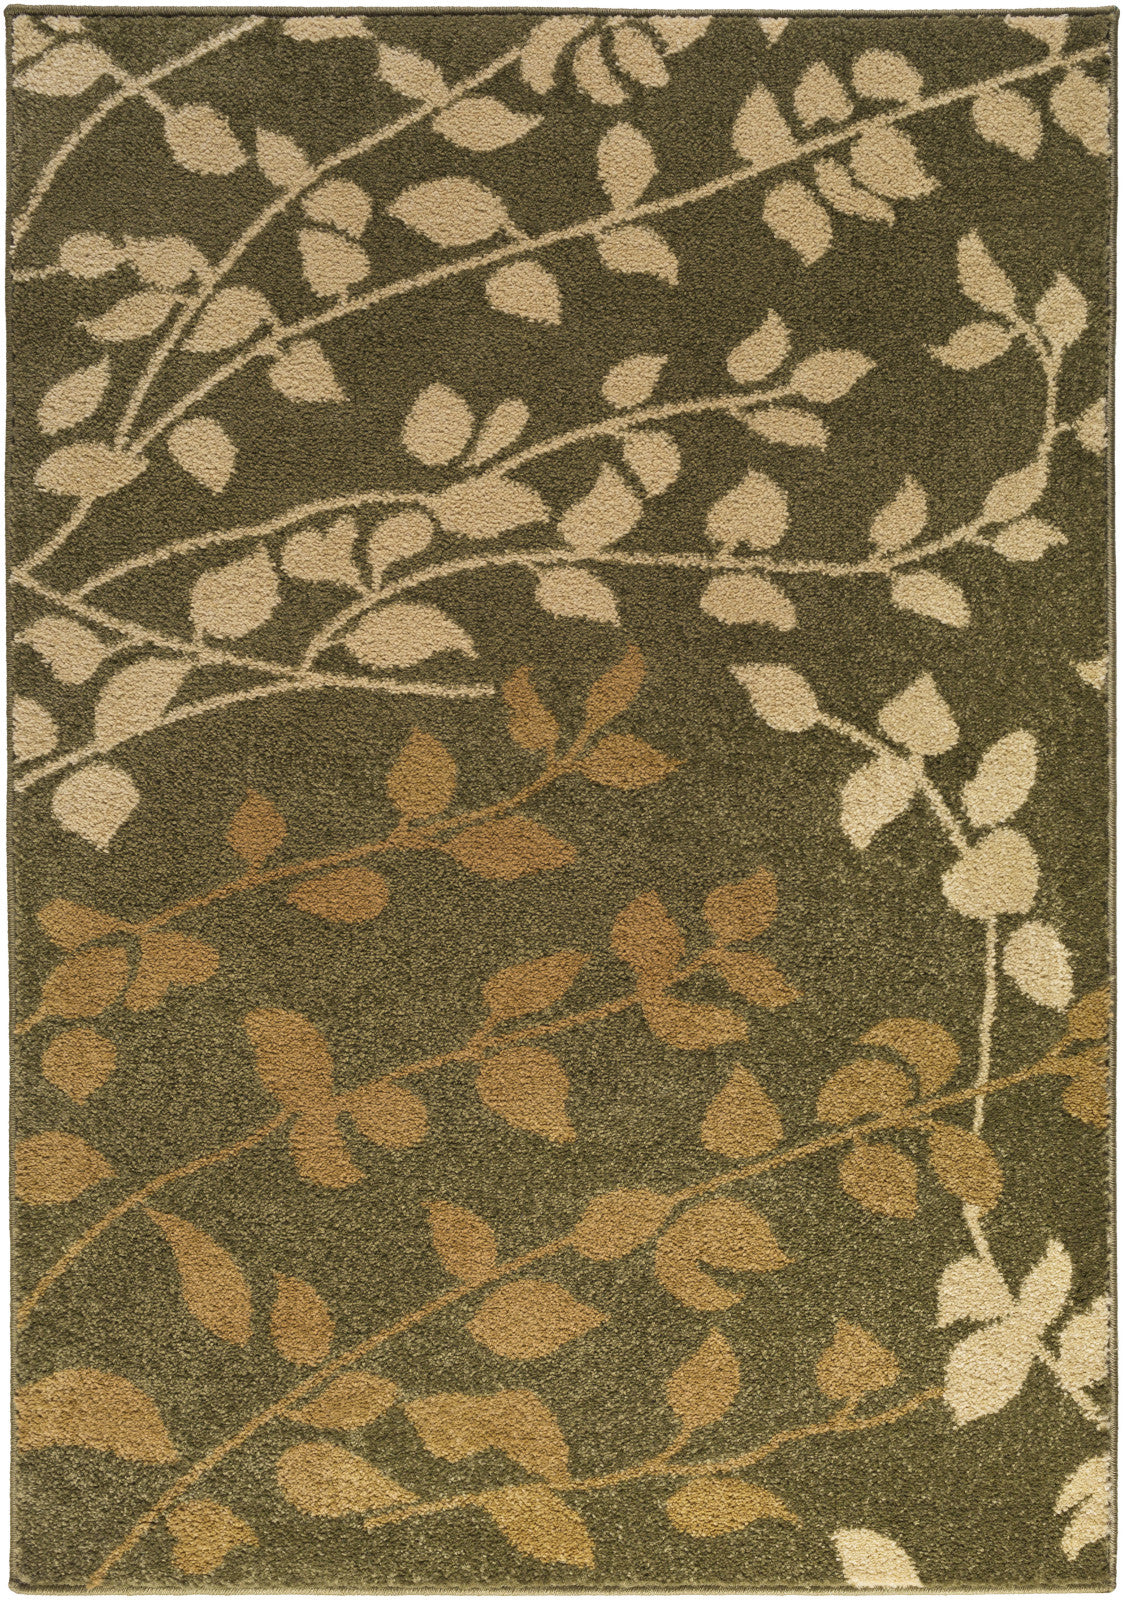 Surya River Home RVH-1002 Green Area Rug by Mossy Oak